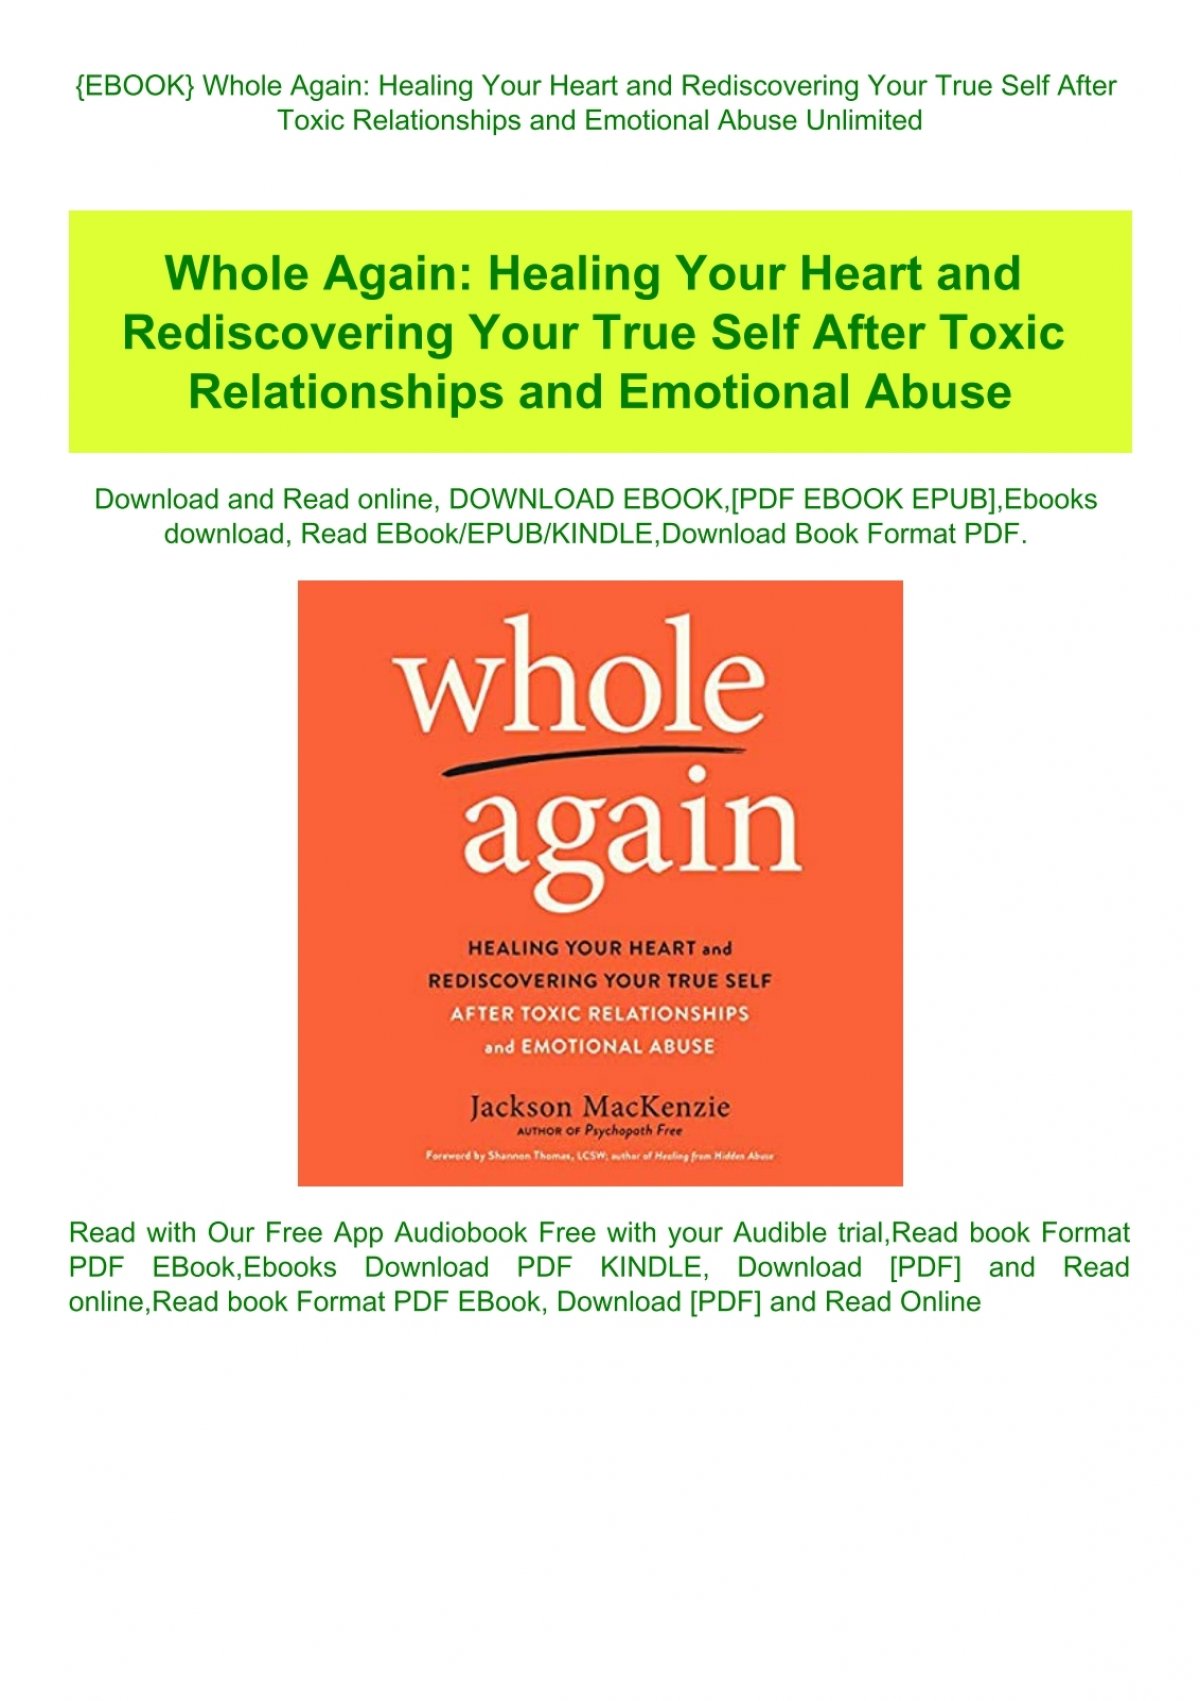 {ebook} Whole Again Healing Your Heart And Rediscovering Your True Self After Toxic